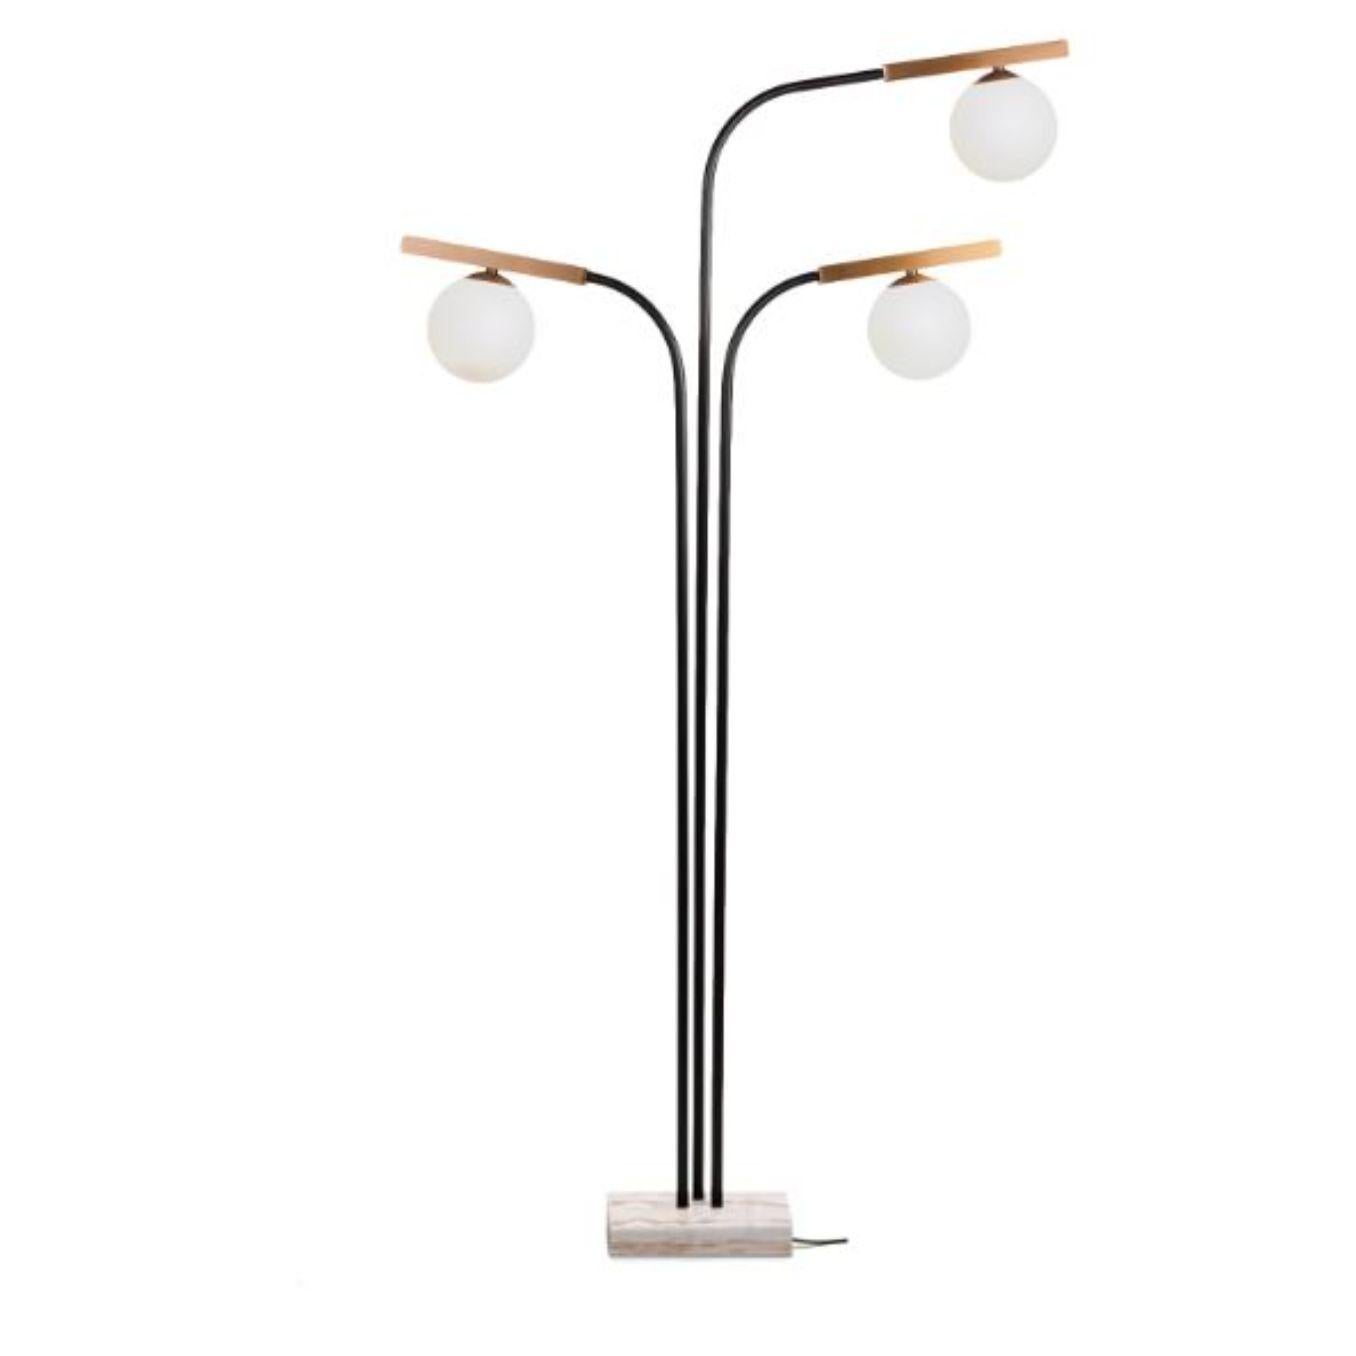 Bronze globe floor lamp with marble base by Dooq
Dimensions: W 96 x D 20 x H 174 cm
Materials: lacquered metal, polished or brushed metal, bronze, marble.
Also available in different colours and materials. 

Information:
230V/50Hz
3 x max. G9
4W